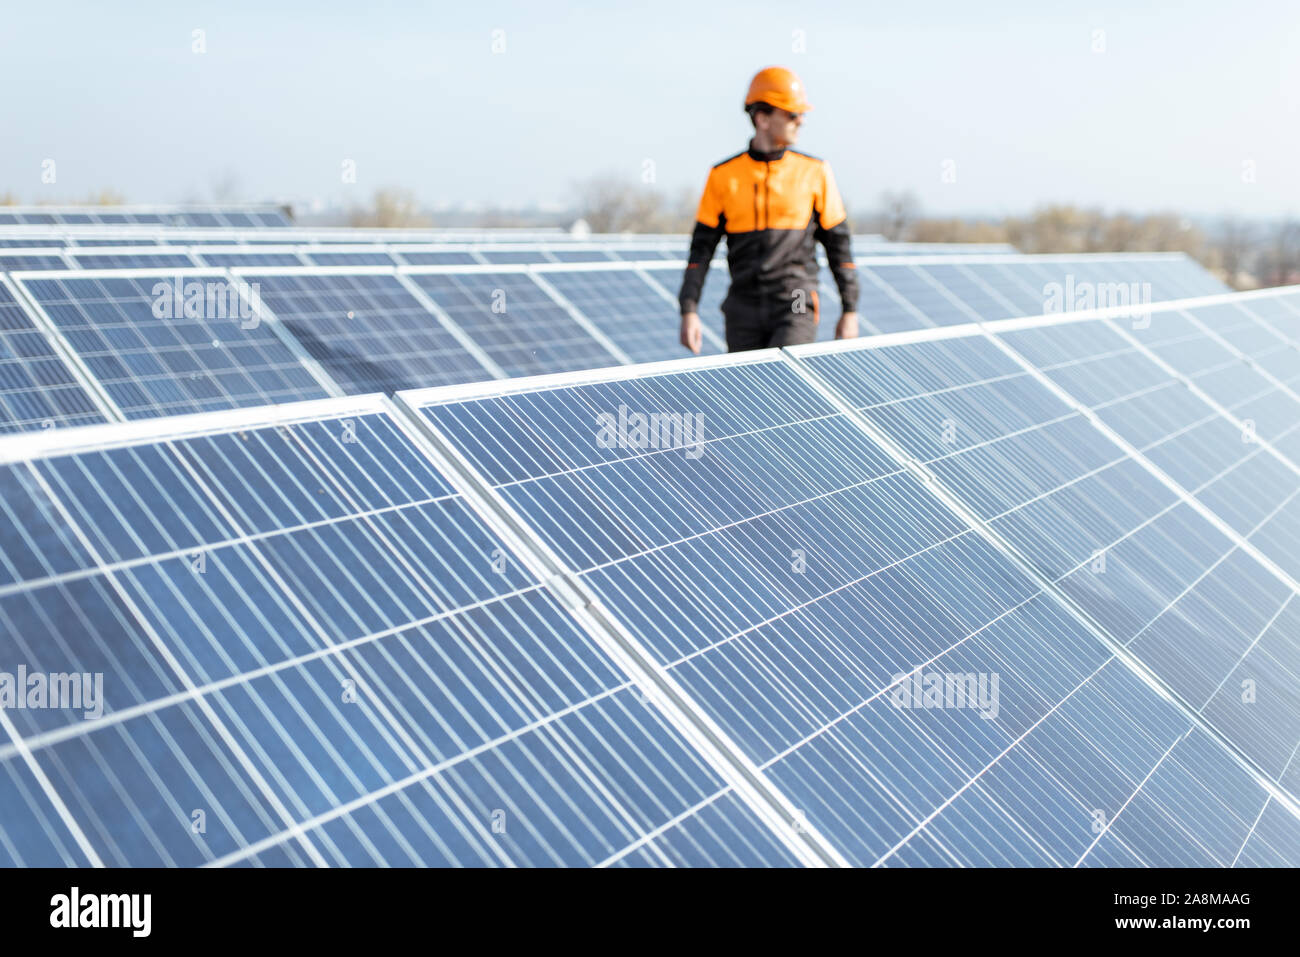 View on the rooftop solar power plant with engineer in protective workwear walking and examining photovoltaic panels. Concept of alternative energy and its maintenance Stock Photo